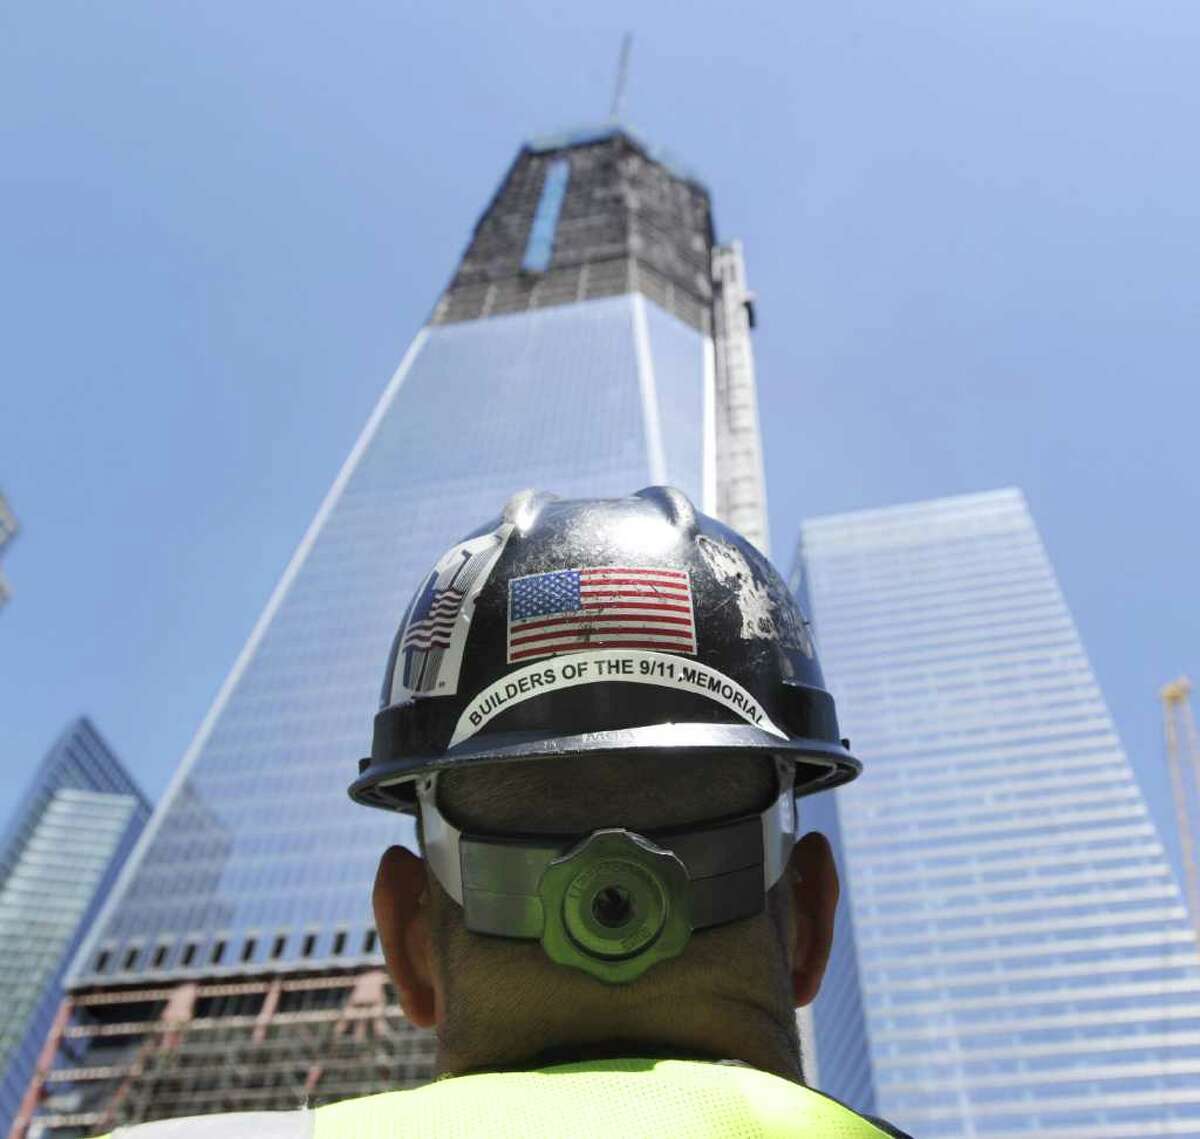 Chris Powers of KC Fabrications, Inc., of Gardiner, N.Y., the company constructing the memorials at the Freedom Tower, looks skyward toward the tower in New York City, Thursday, Aug. 11, 2011, that is under construction a month before the 10th anniversary of 9/11. Bob Lucky/Hearst Newpapers